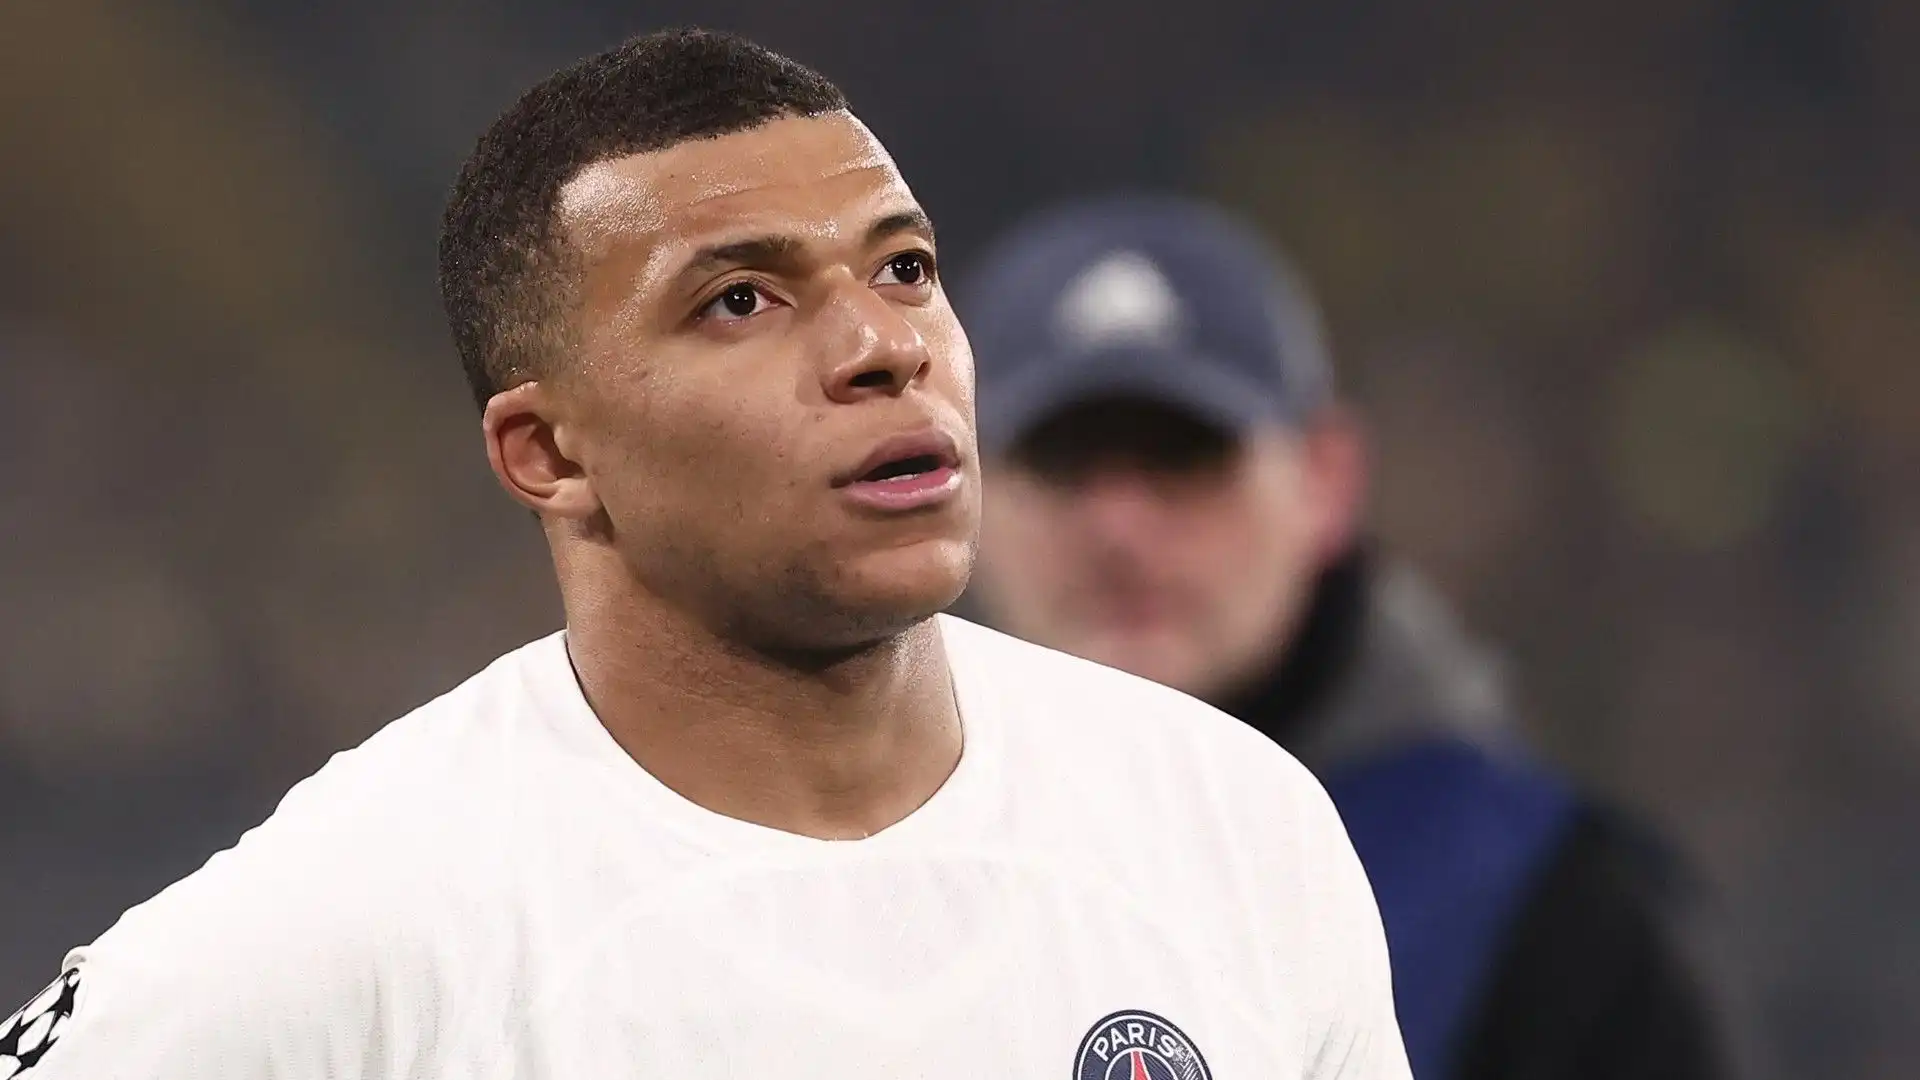 Mbappé-Real Madrid: un amore in attesa. Foto